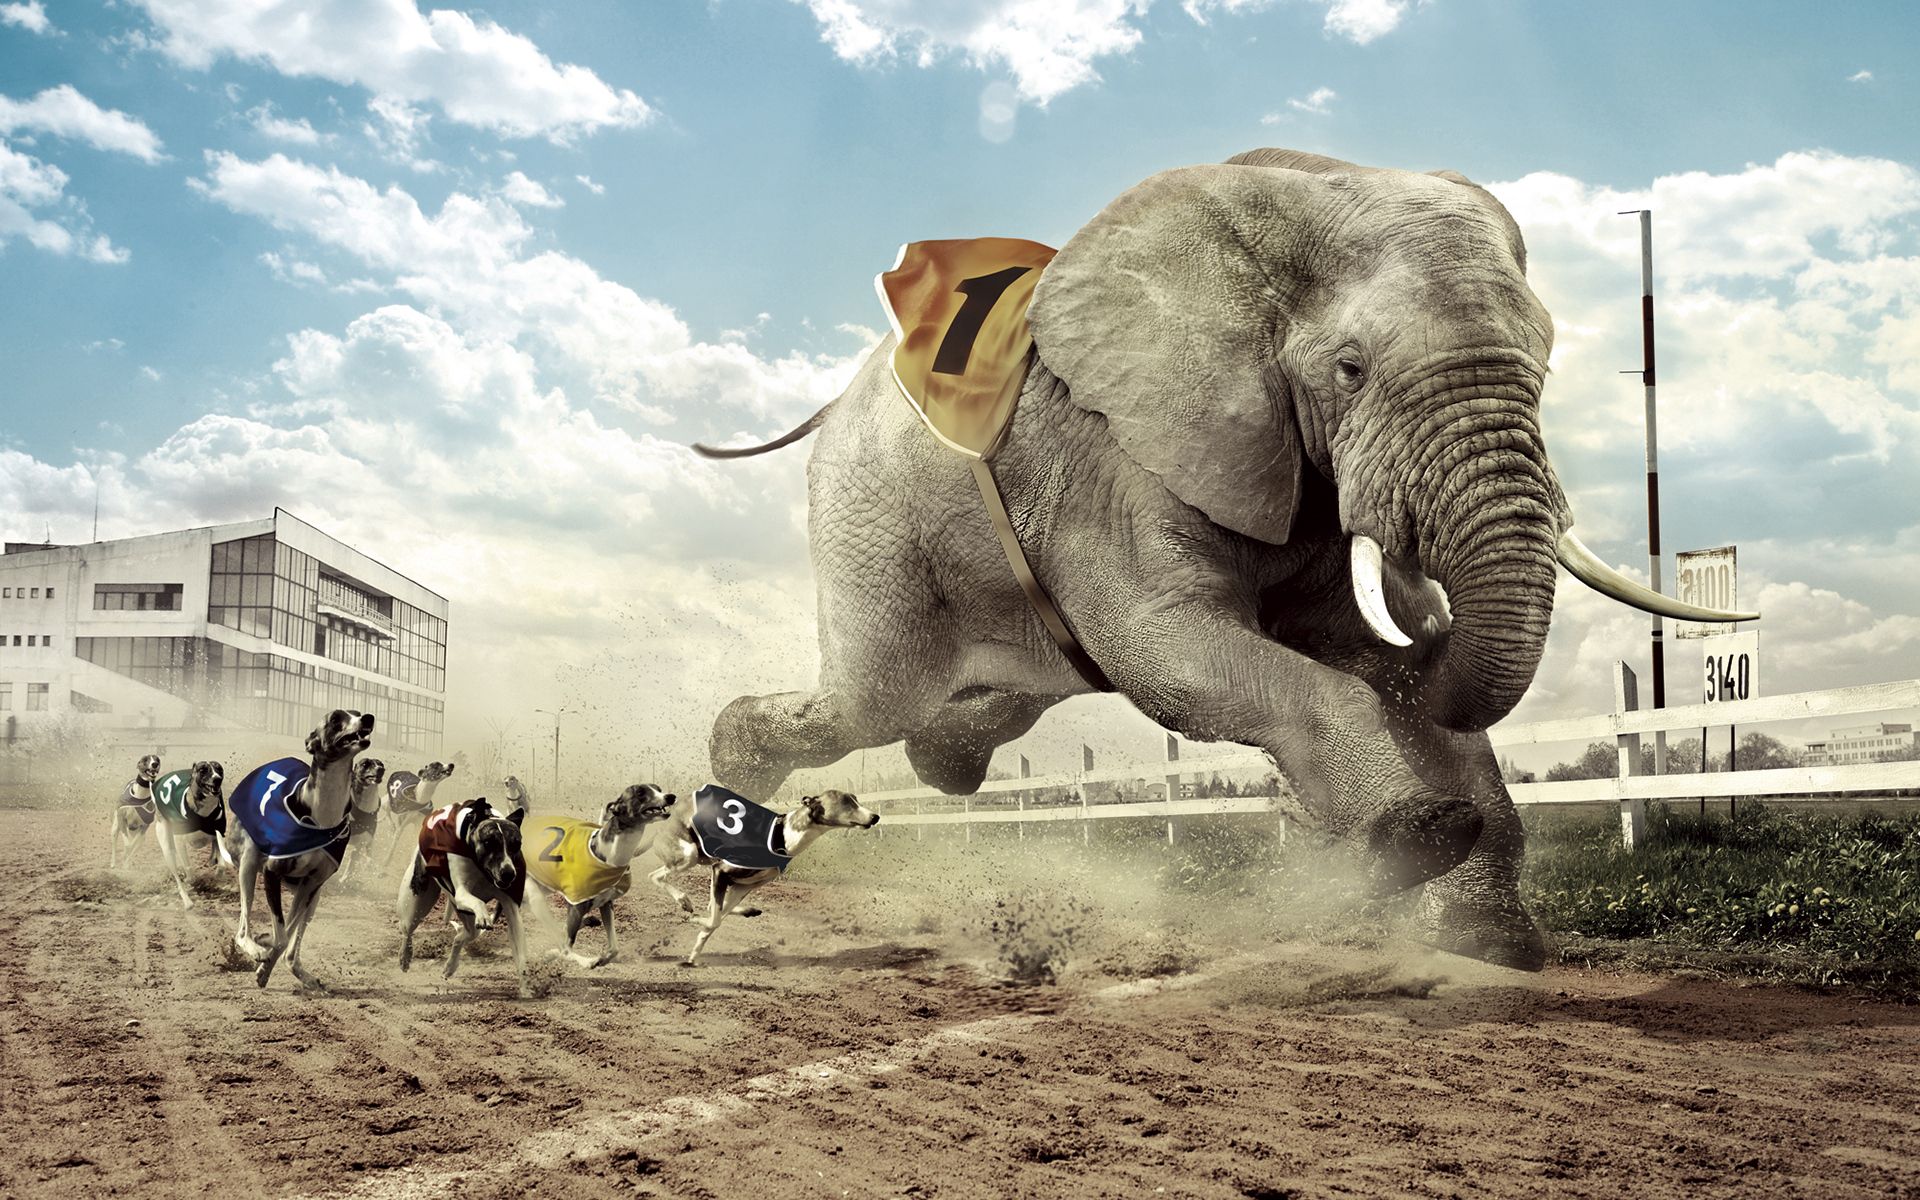 animals, grass, sky, sand, building, lights, dog, lanterns, house, glass, fence, fangs, cloud, track, elephant, heat, race, competition